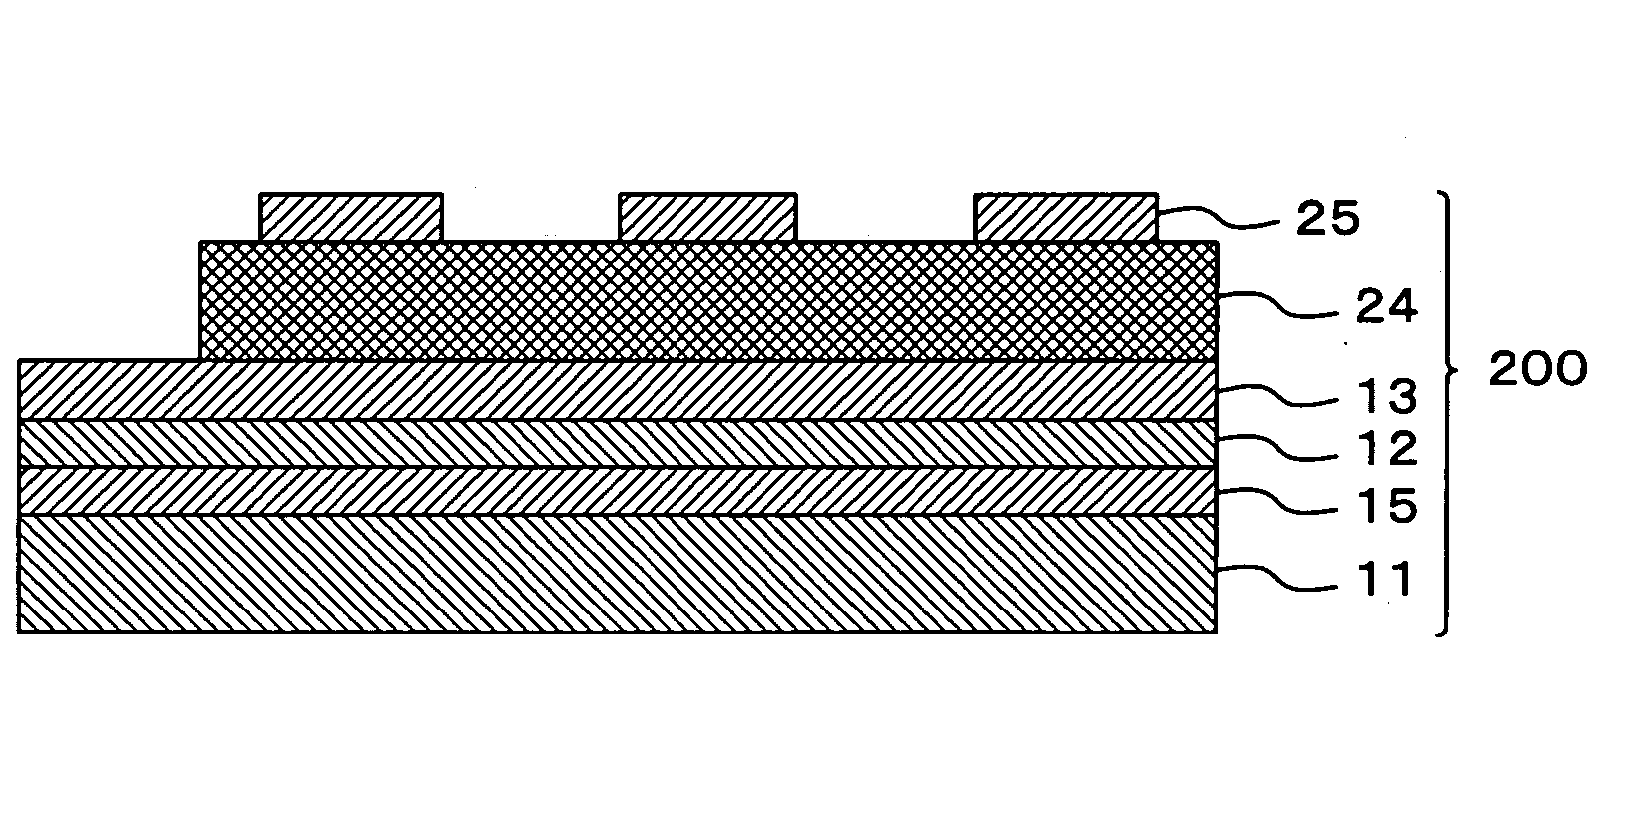 Piezoelectric device, liquid jetting head, ferroelectric device, electronic device and methods for manufacturing these devices